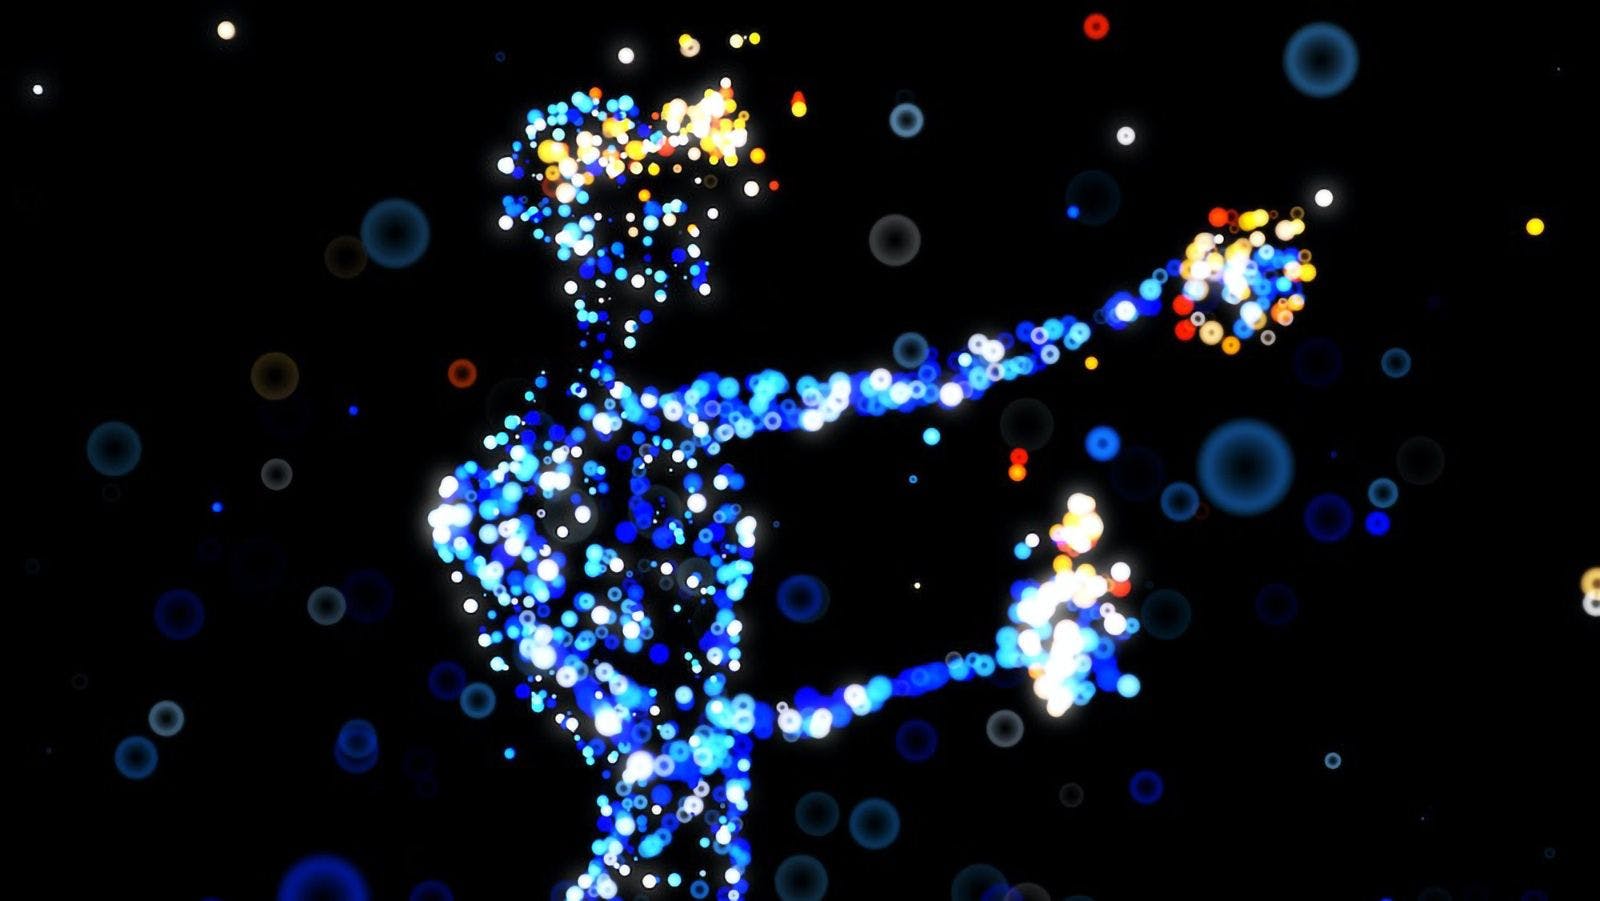 Image composed of light dots in different colors shows a stylized person wearing a headset and holding a controller in both hands.